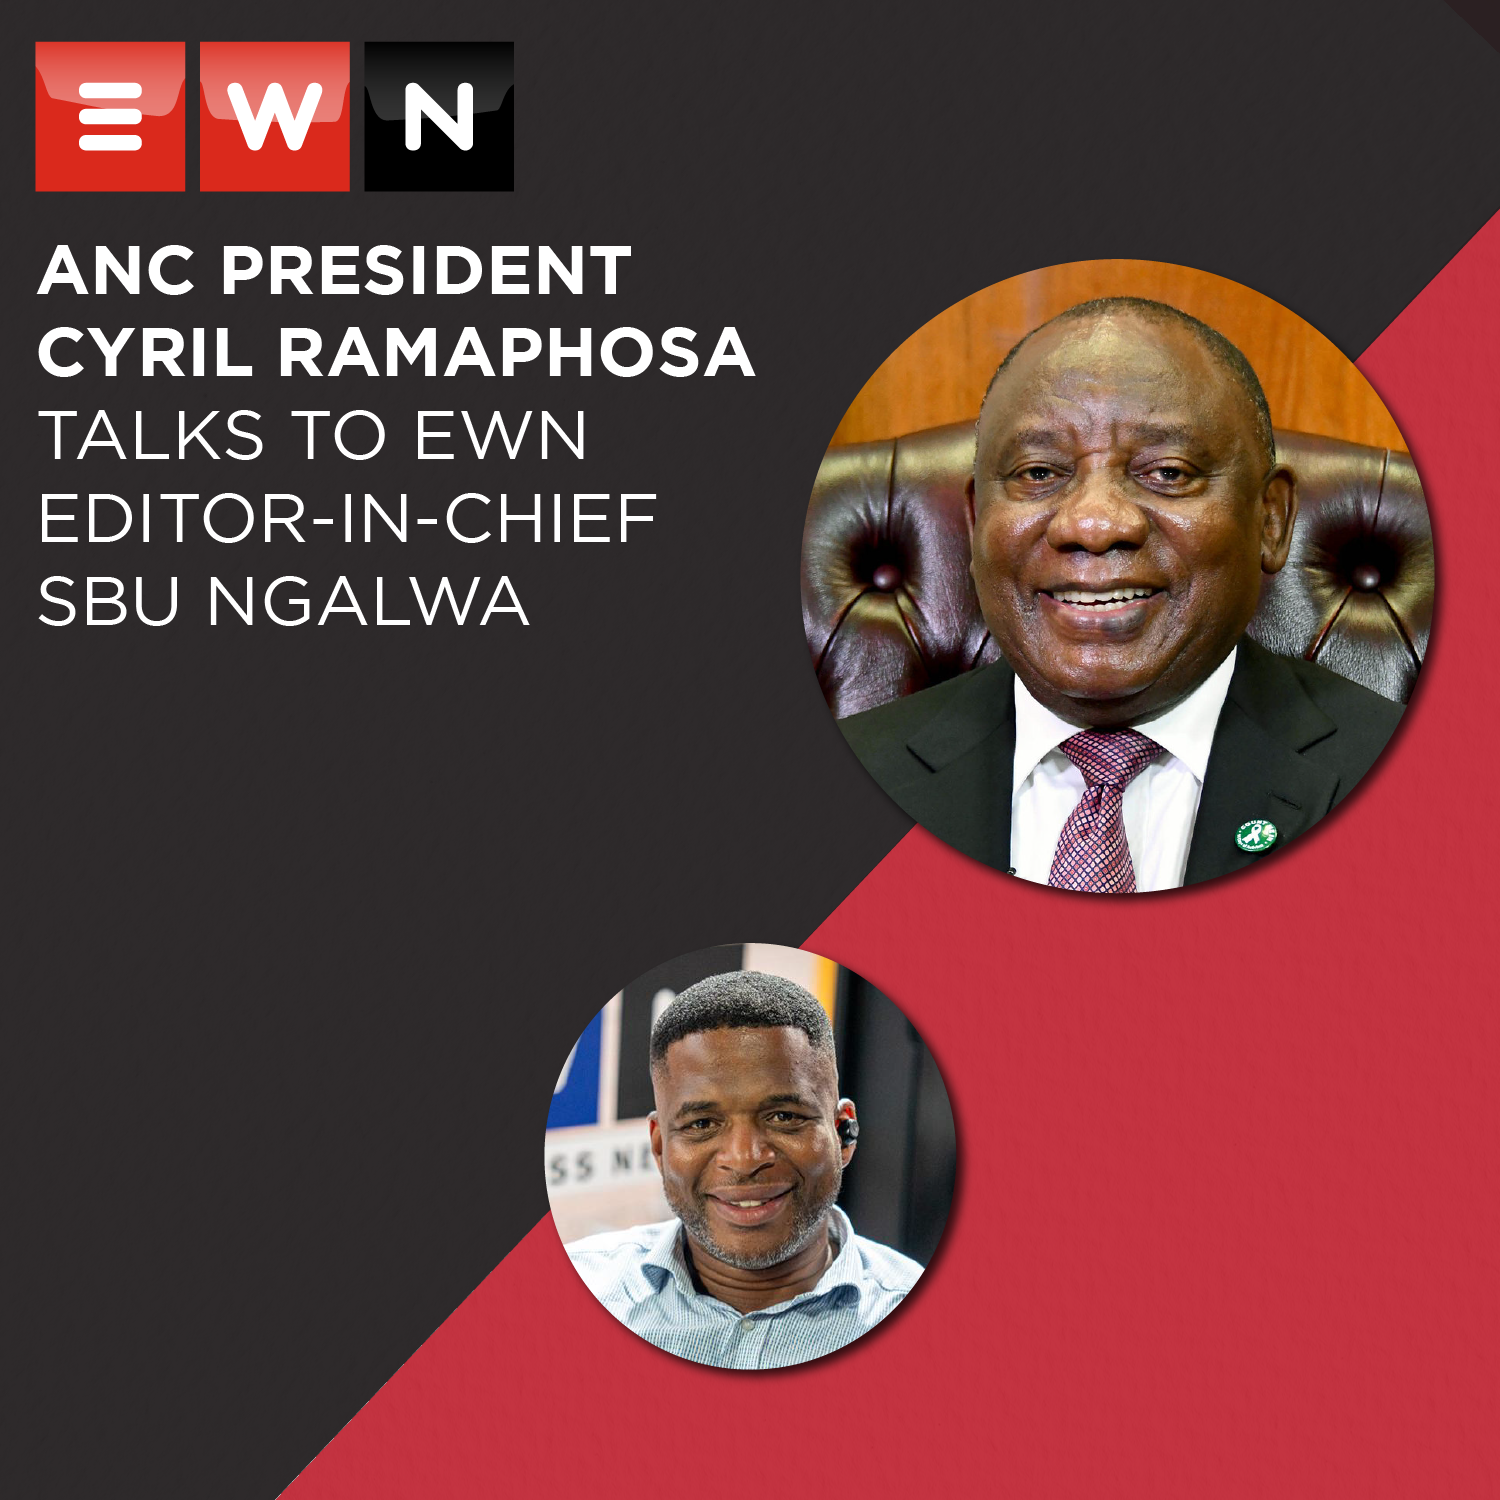 A post-January 8 statement special with Cyril Ramaphosa